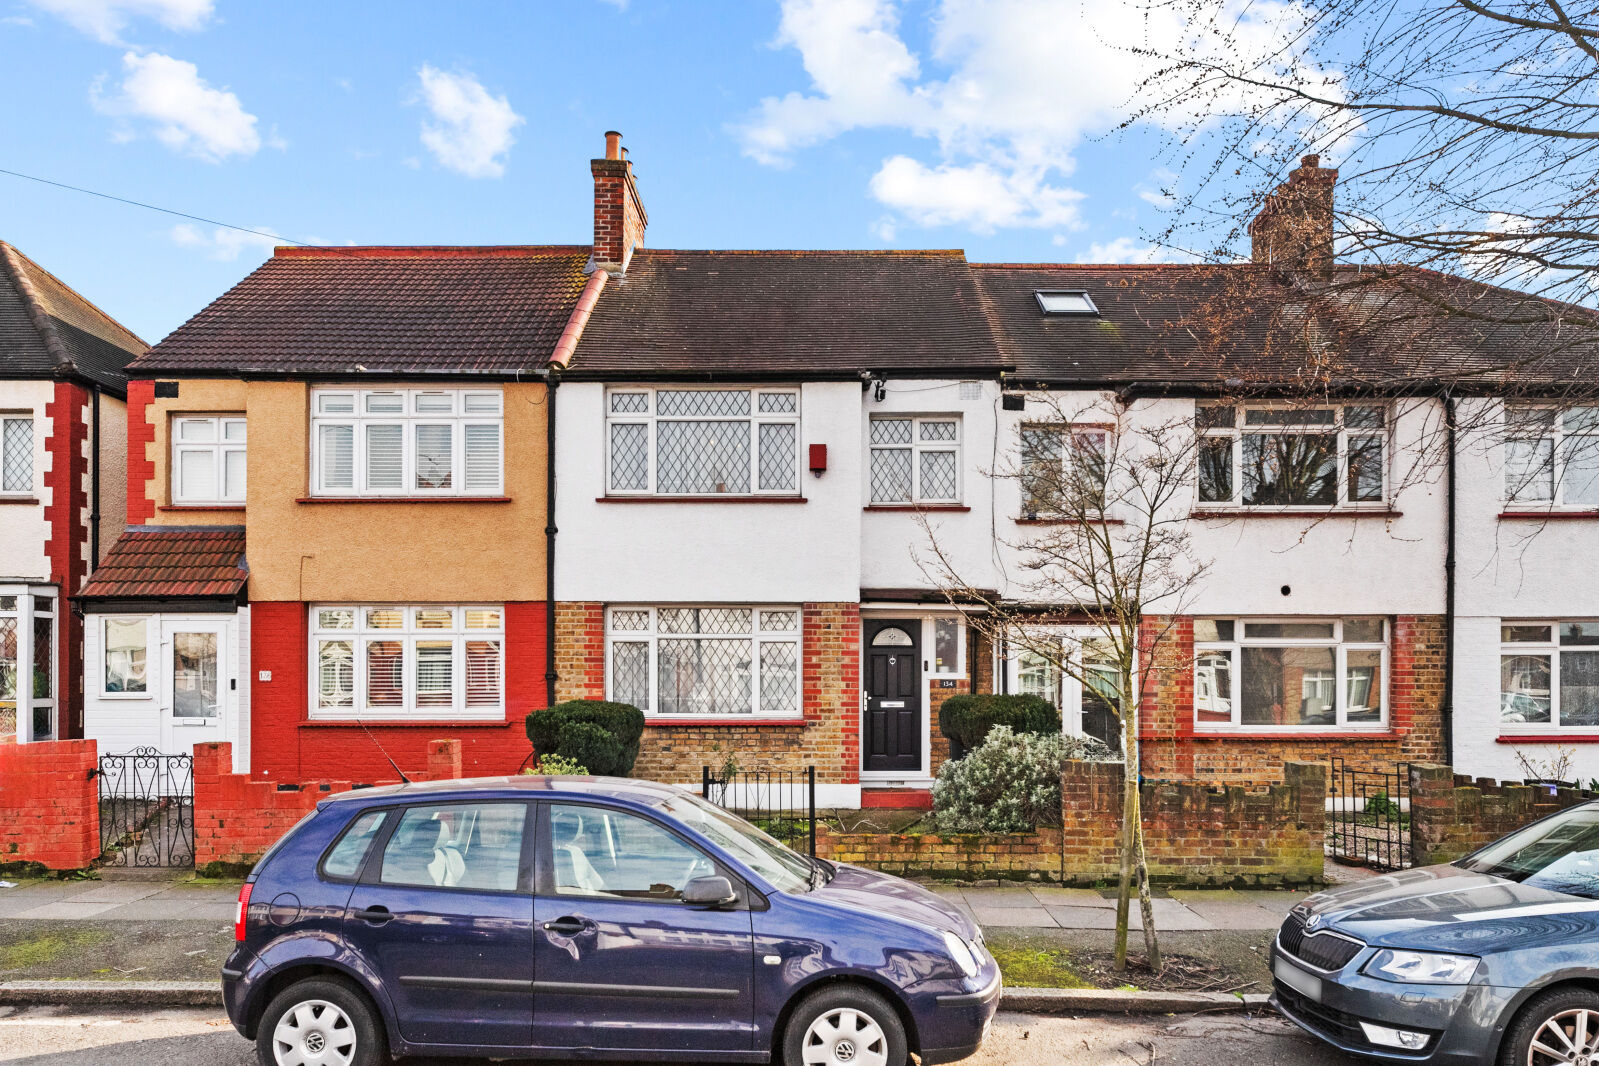 3 bedroom mid terraced house for sale Sherwood Park Road, Mitcham, CR4, main image